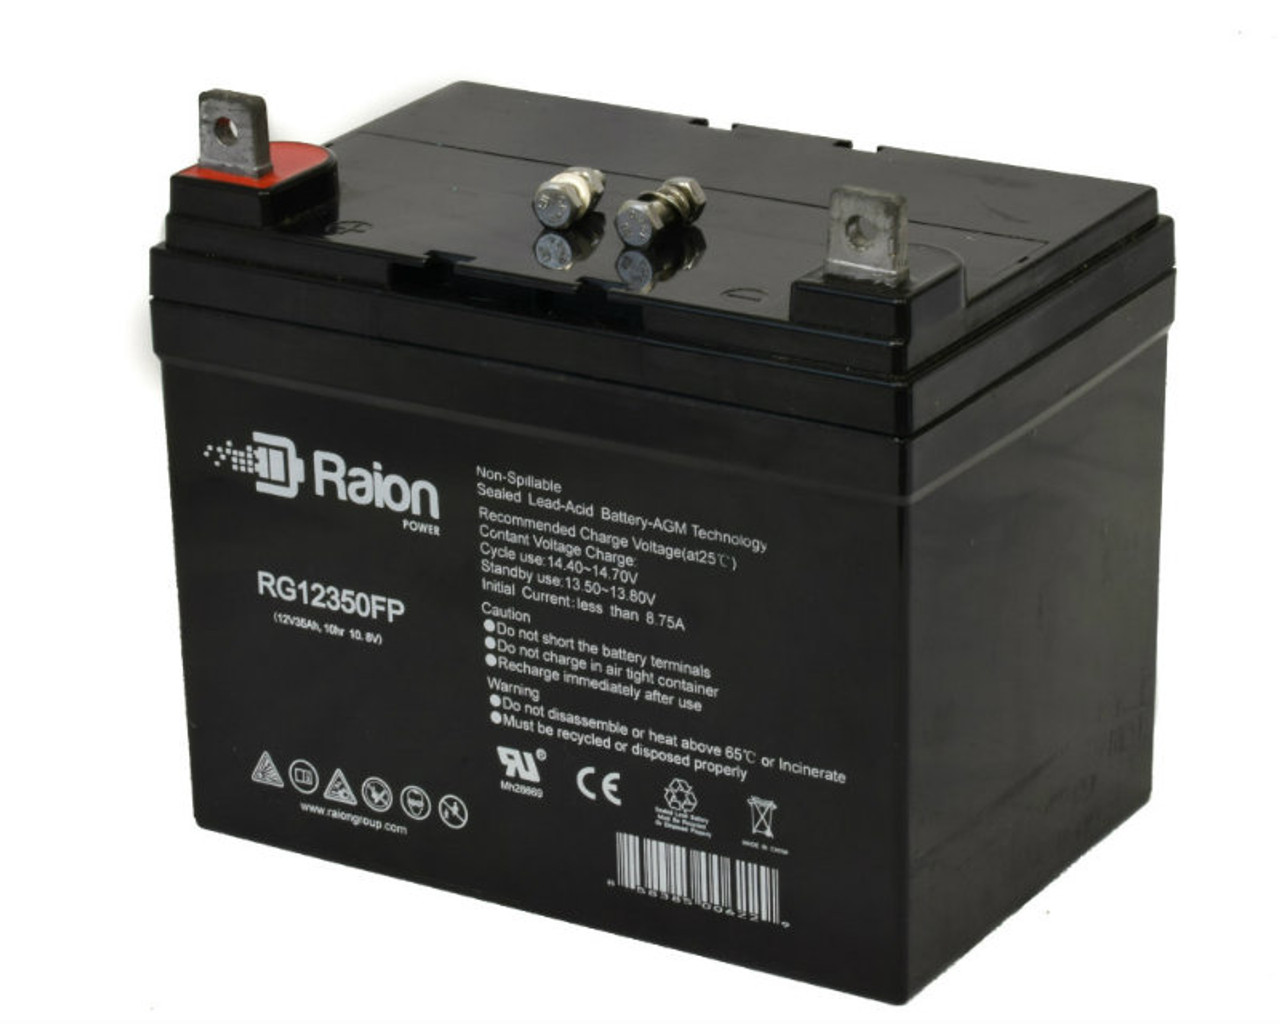 Raion Power Replacement 12V 35Ah Battery for Ariens Gravely EZR 1440 - 1 Pack